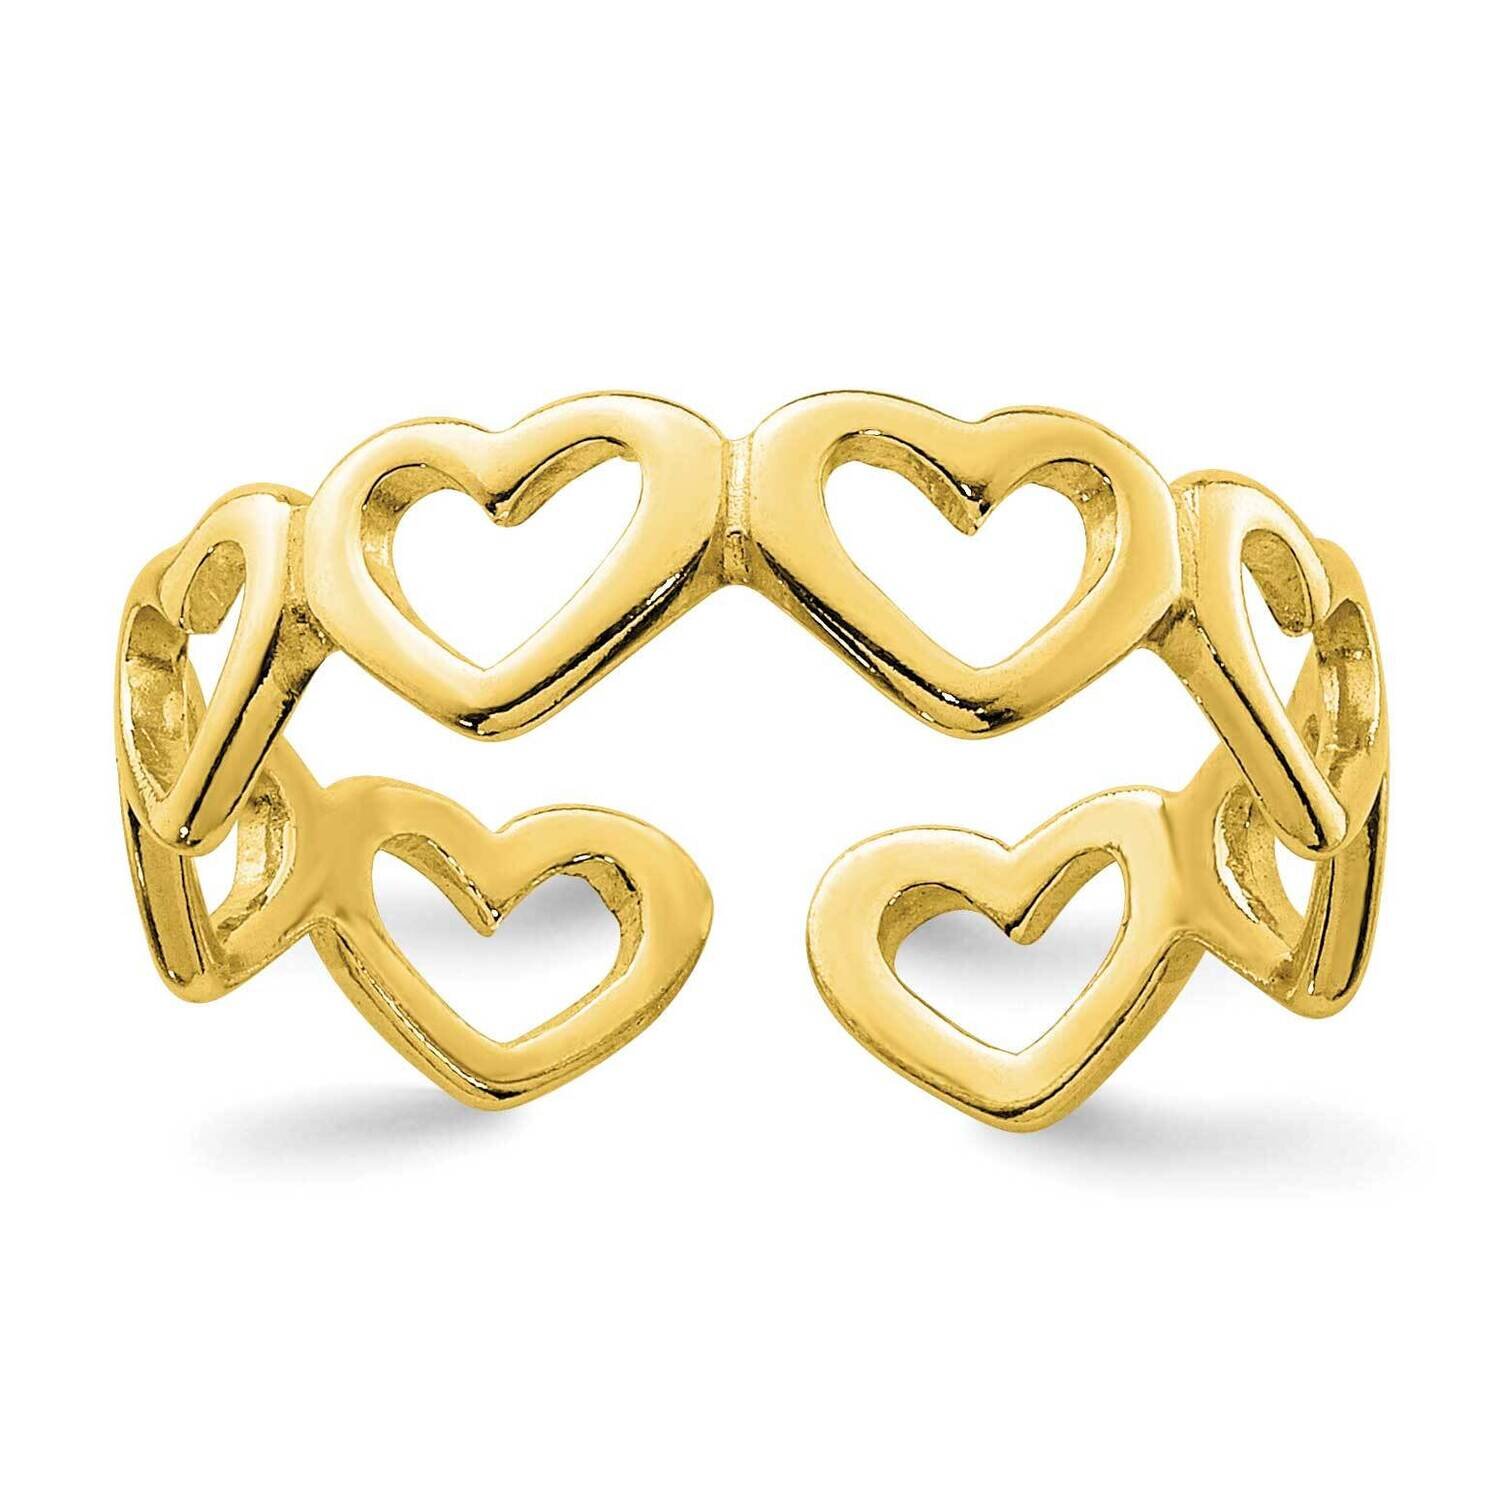 Cut-Out Hearts Toe Ring Sterling Silver Gold-Tone QR830GP